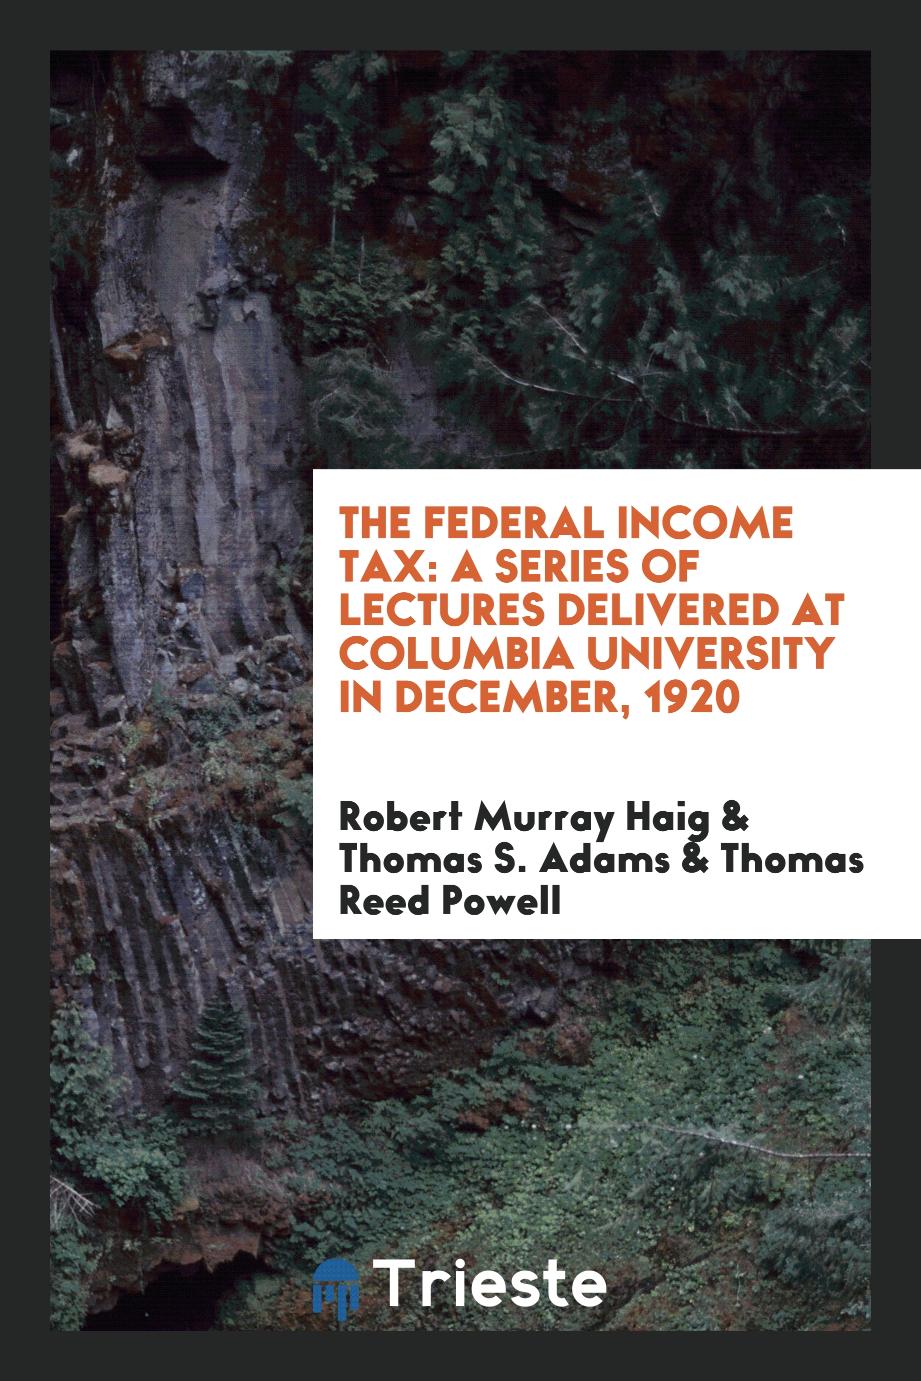 The Federal Income Tax: A Series of Lectures Delivered at Columbia University in December, 1920